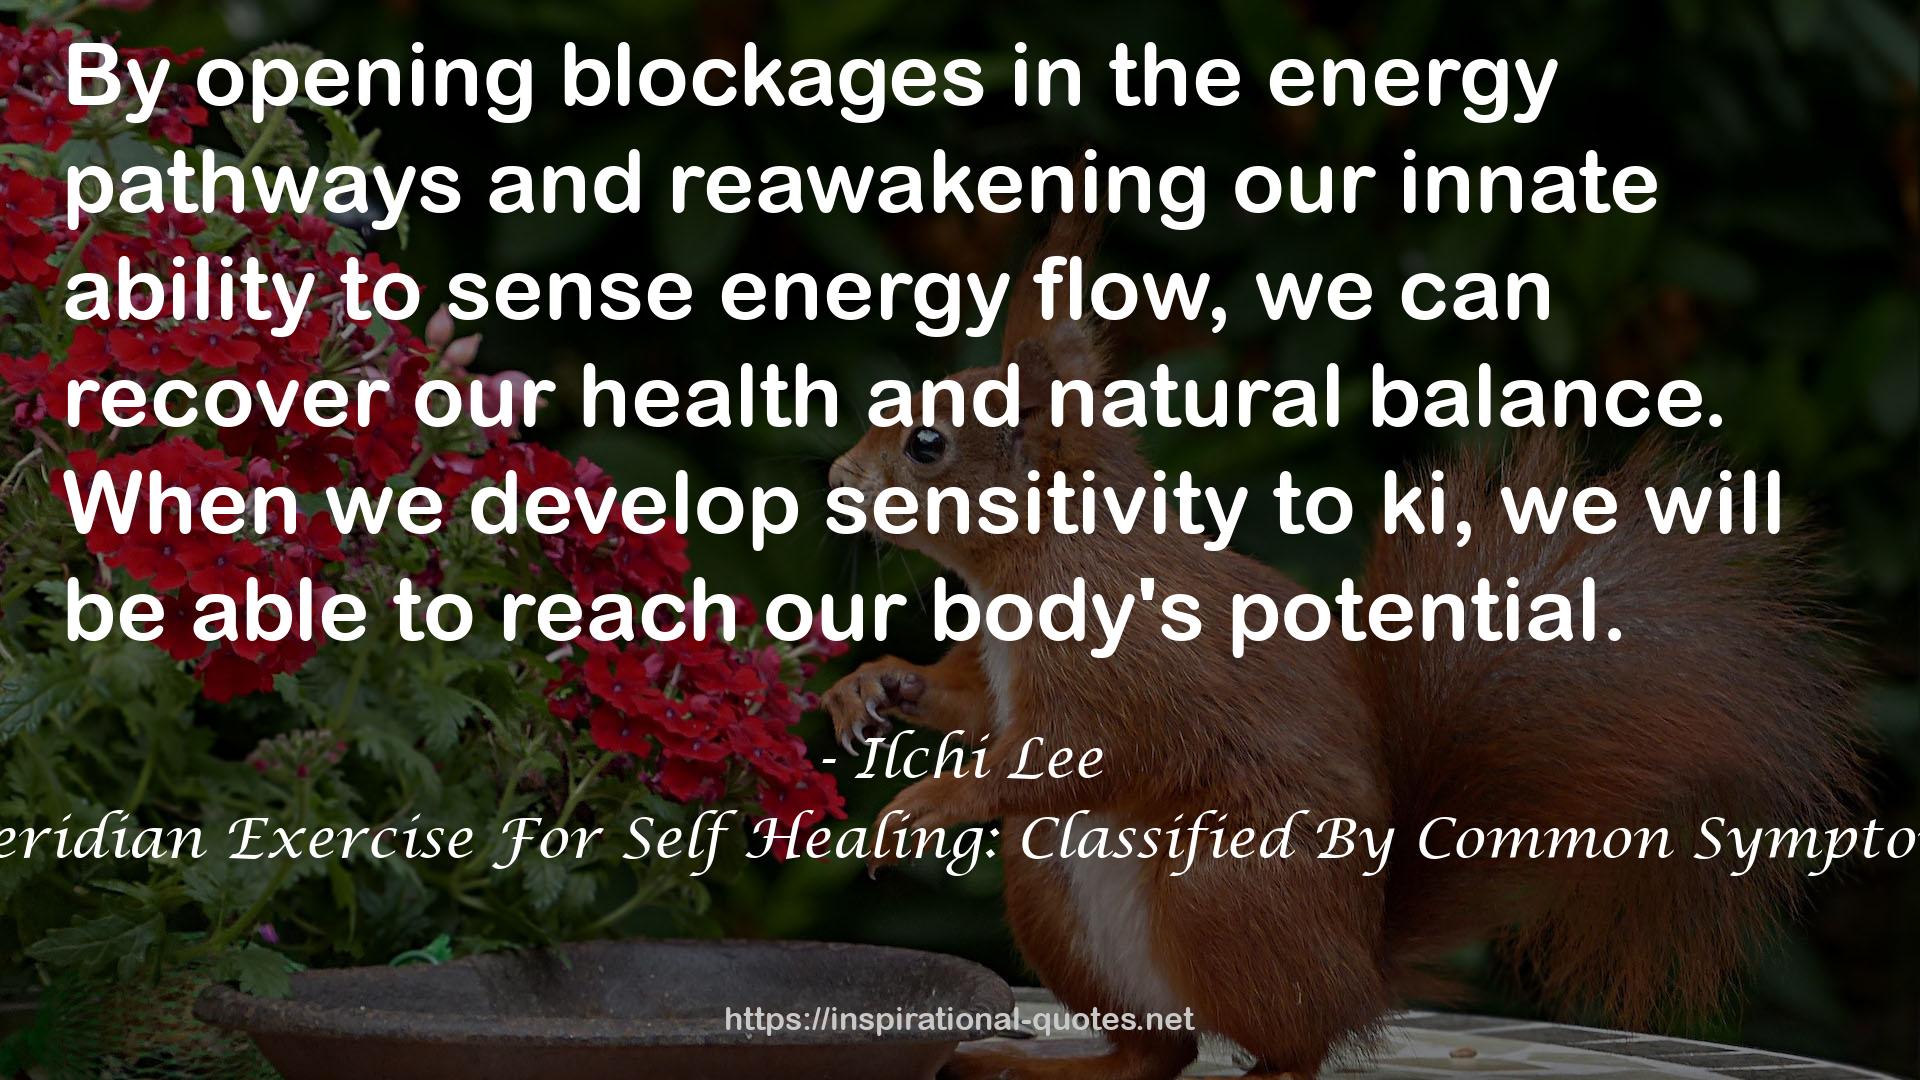 Meridian Exercise For Self Healing: Classified By Common Symptoms QUOTES